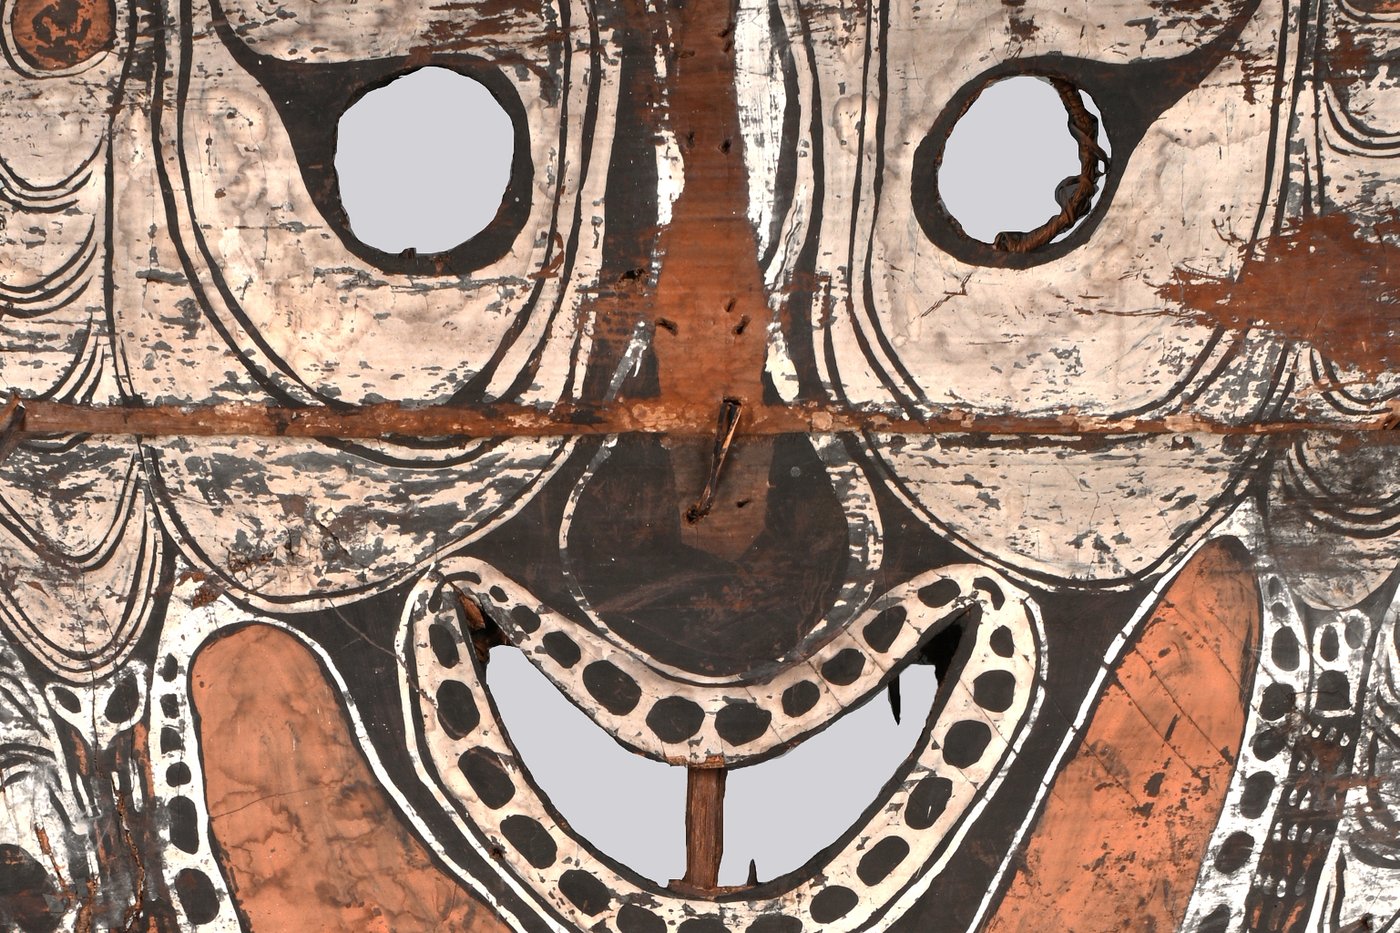 Photography, close up of African wooden mask with black and white patterns outlining facial features